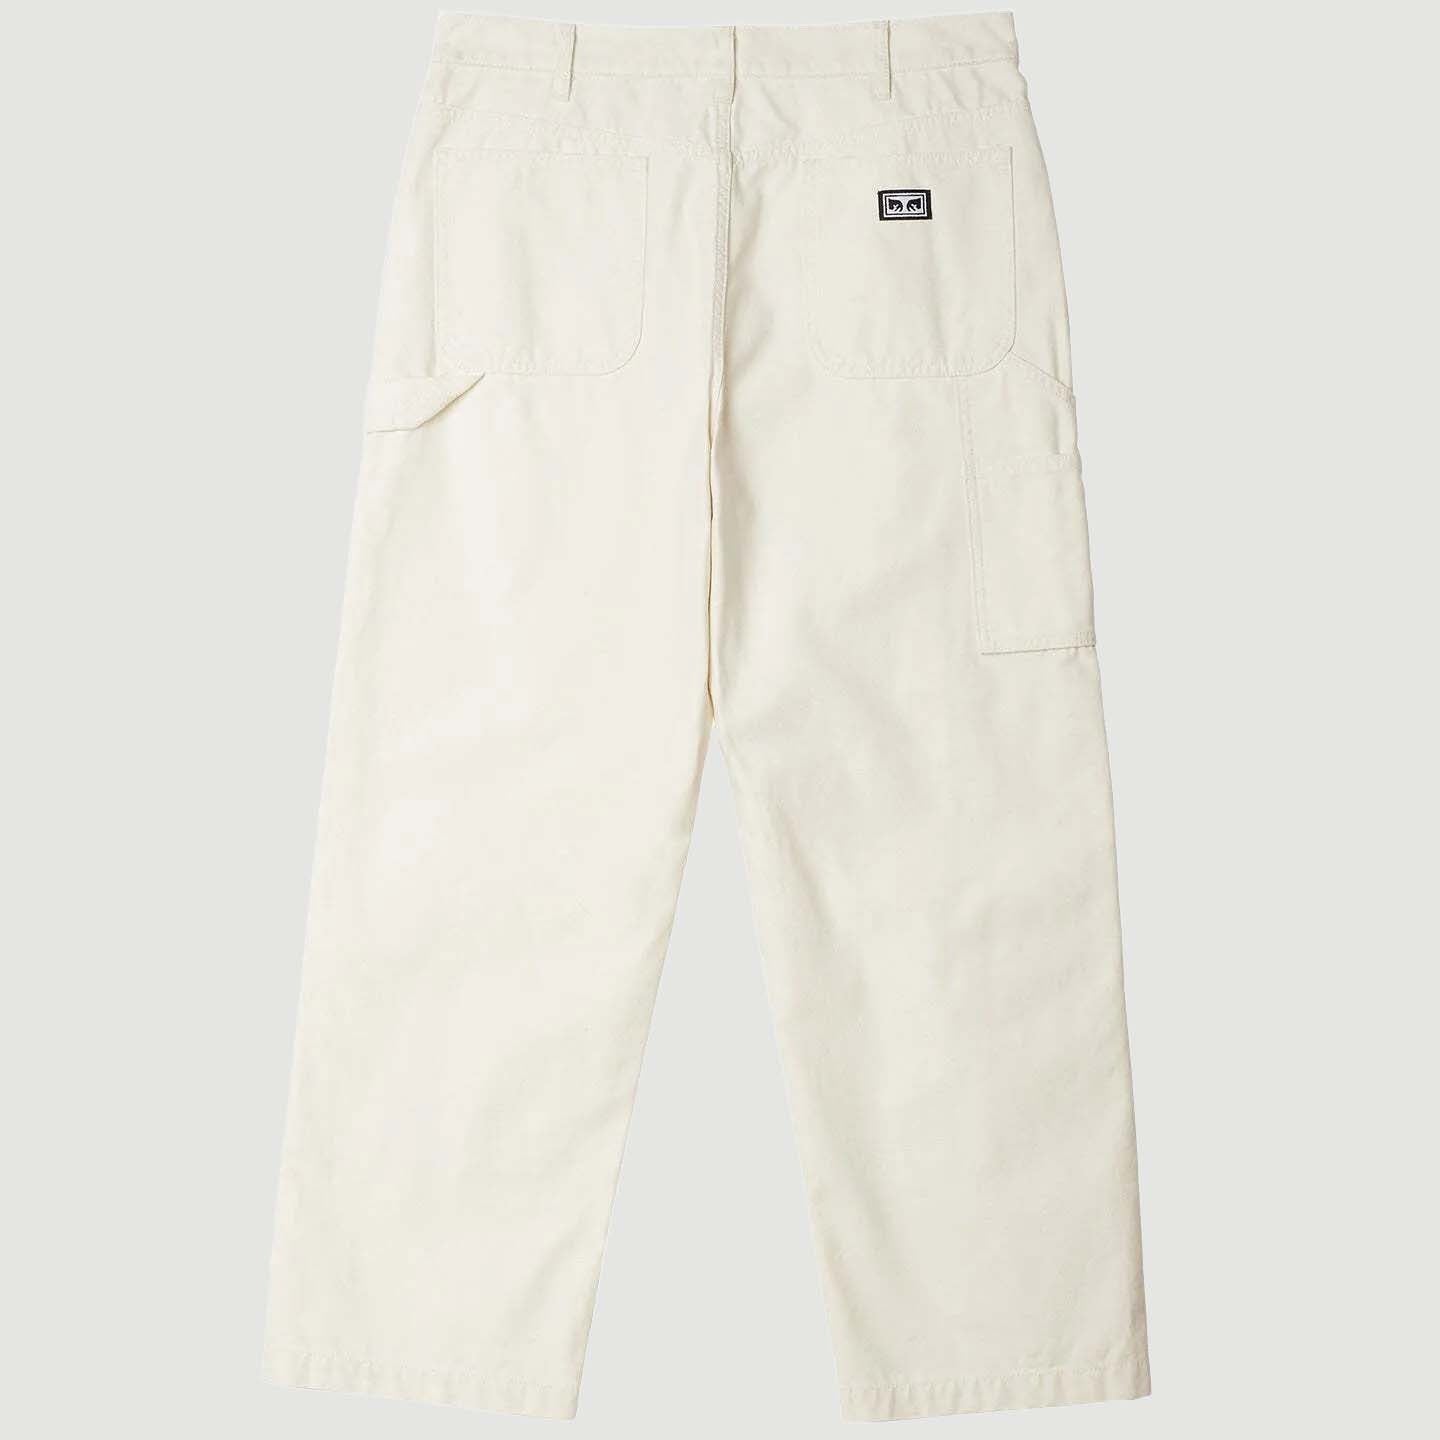 Obey Big Timer Double Knee Pant